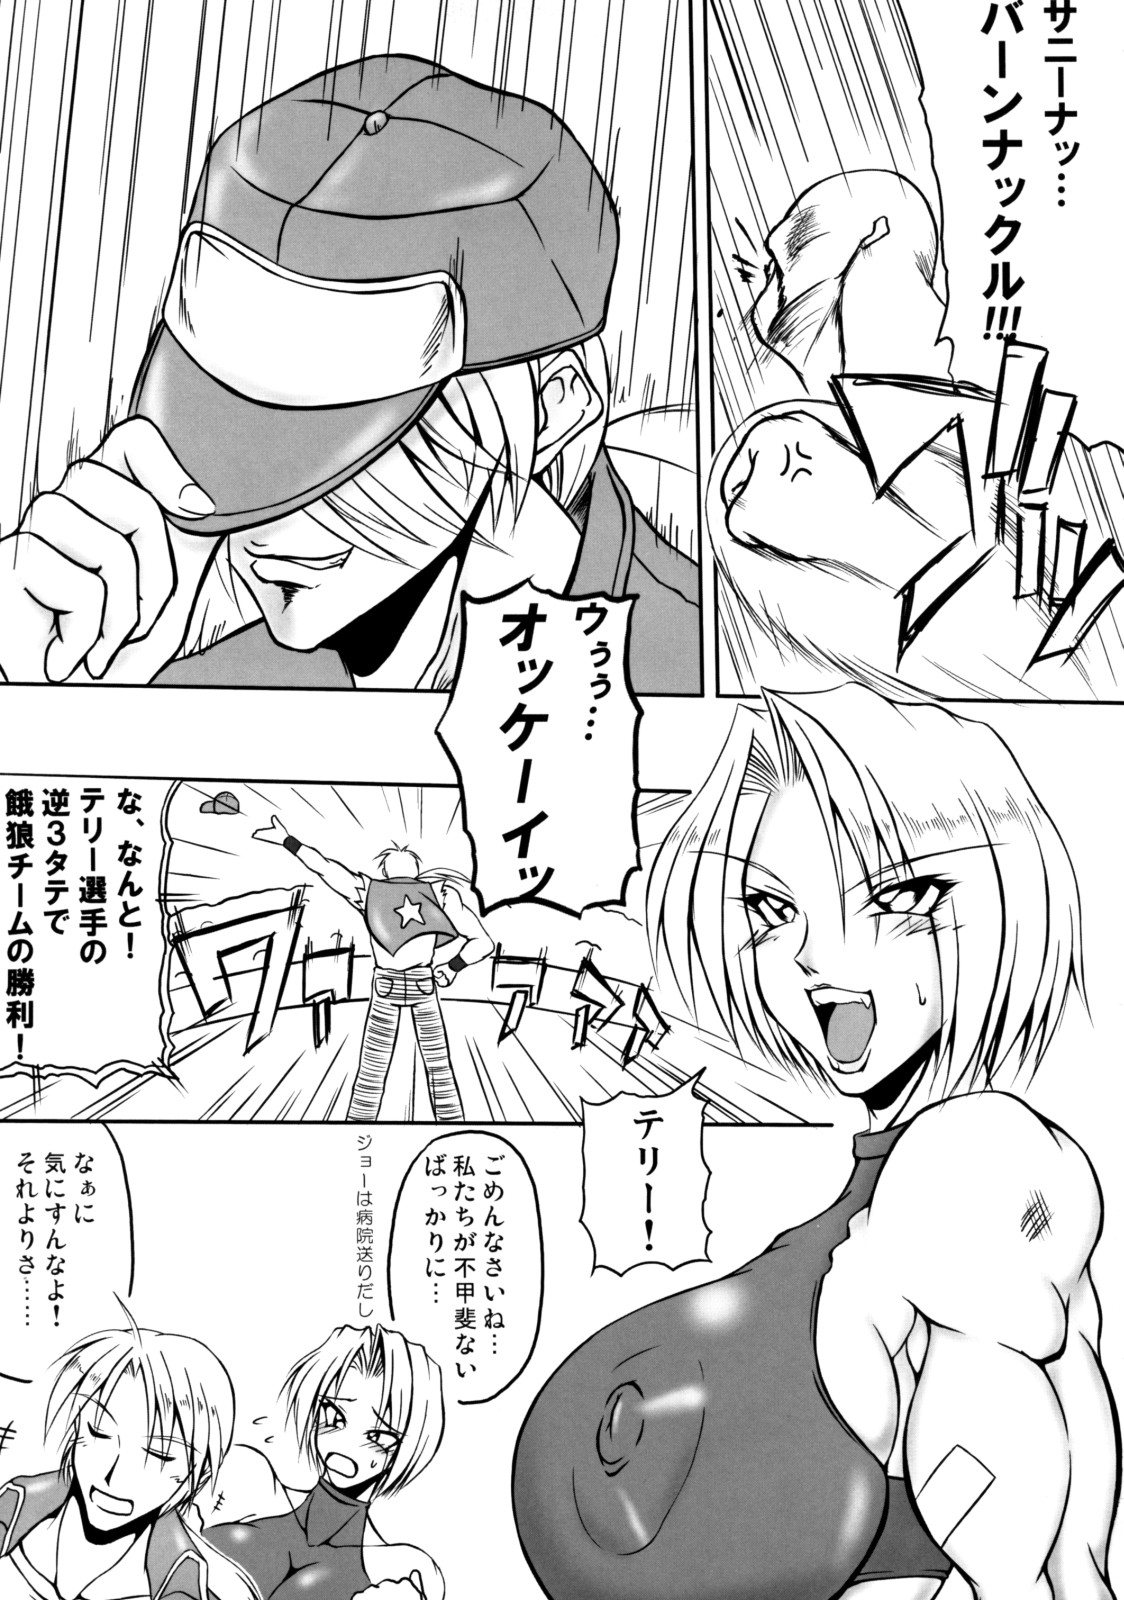 (C74) [Bash-inc (Various)] Mary Bloody Mary (King of Fighters) page 4 full